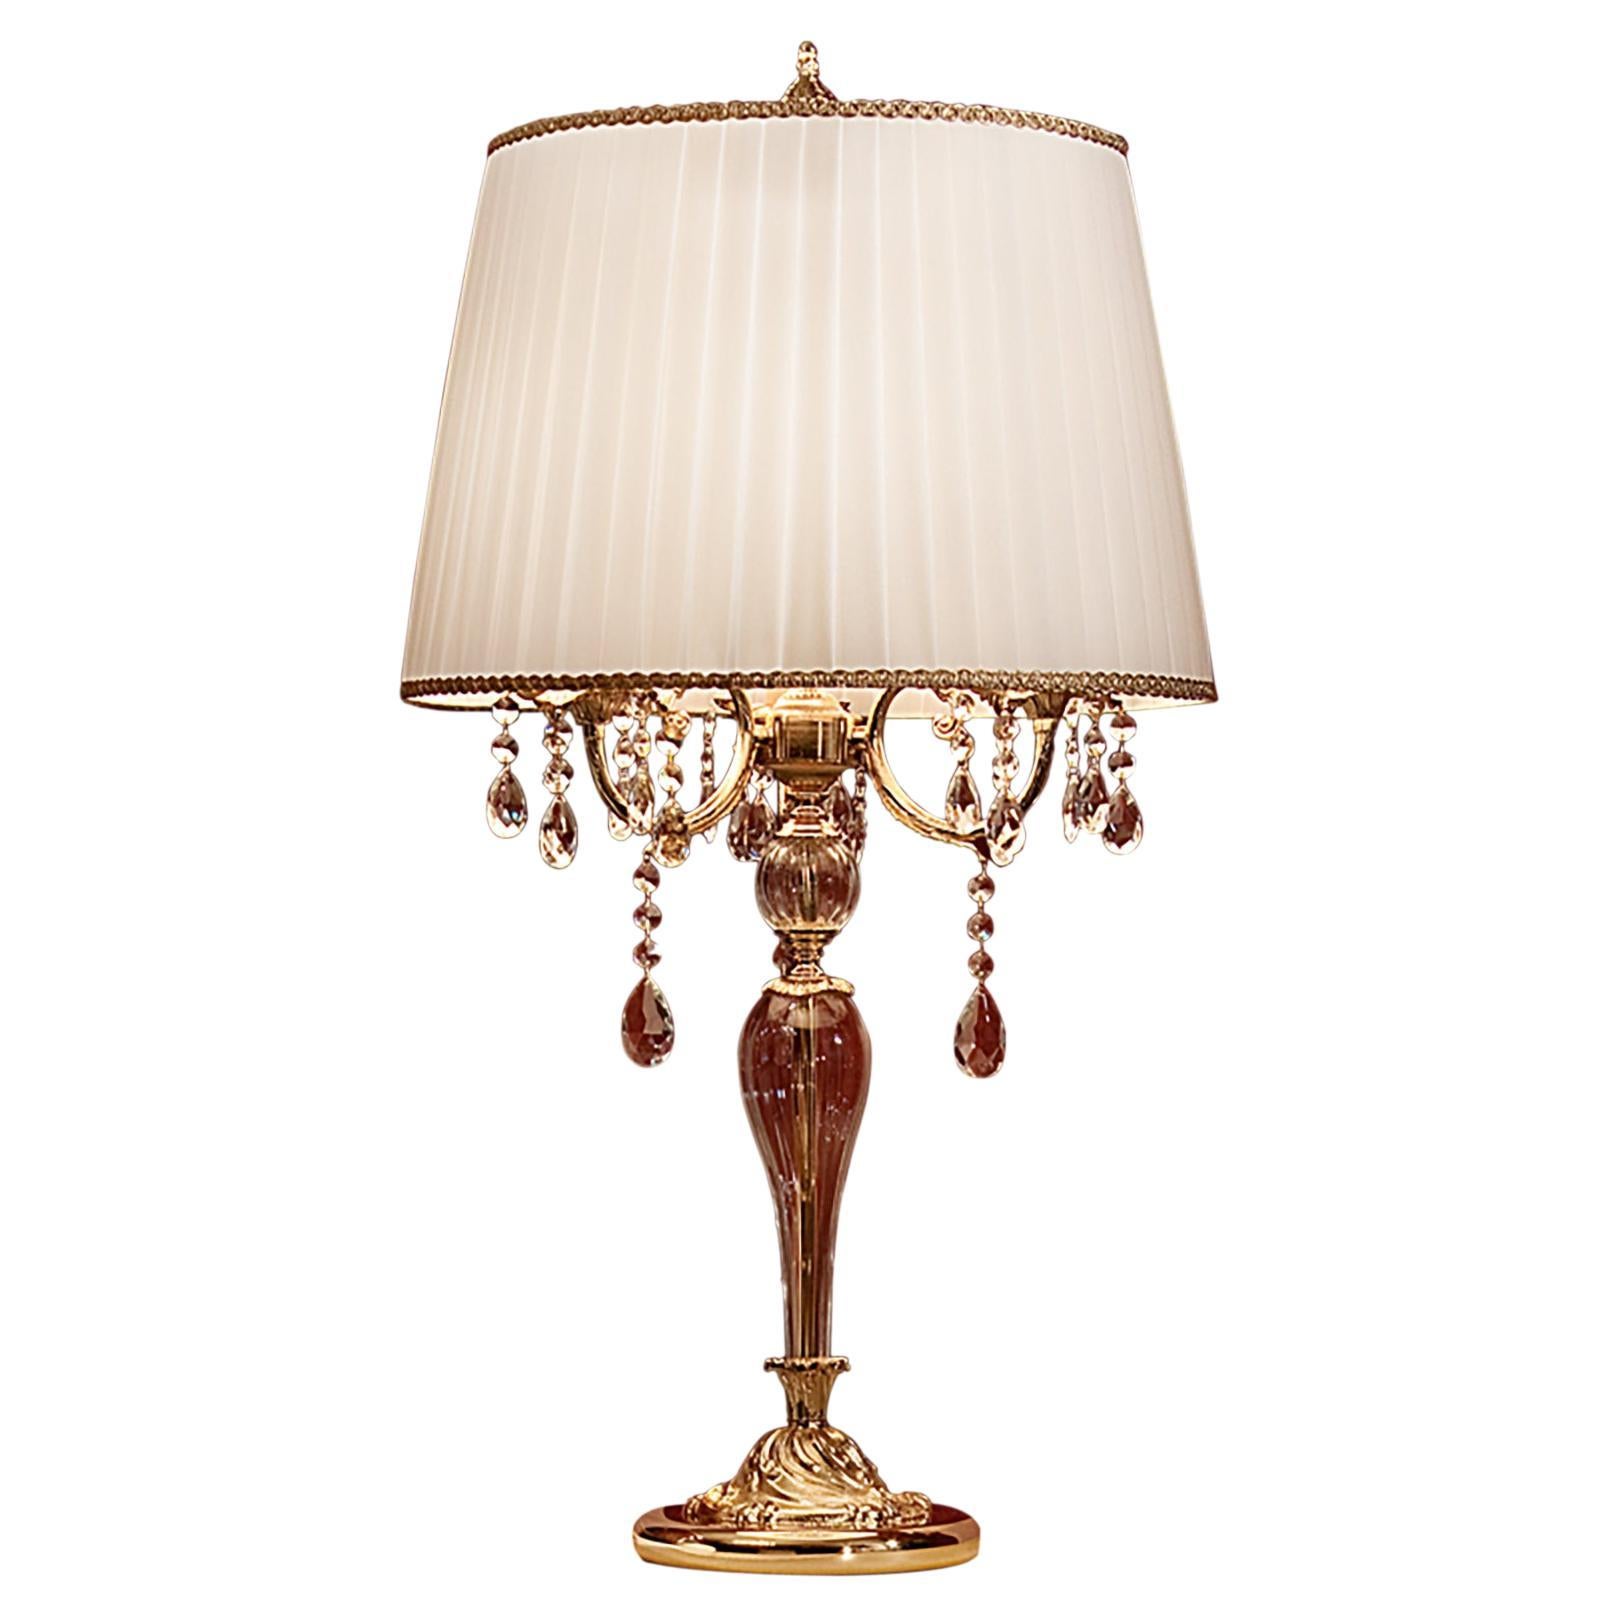 Royal Palace 24kt Antique Gold Plated 3-Lights Table Lamp with Crystal Pendants